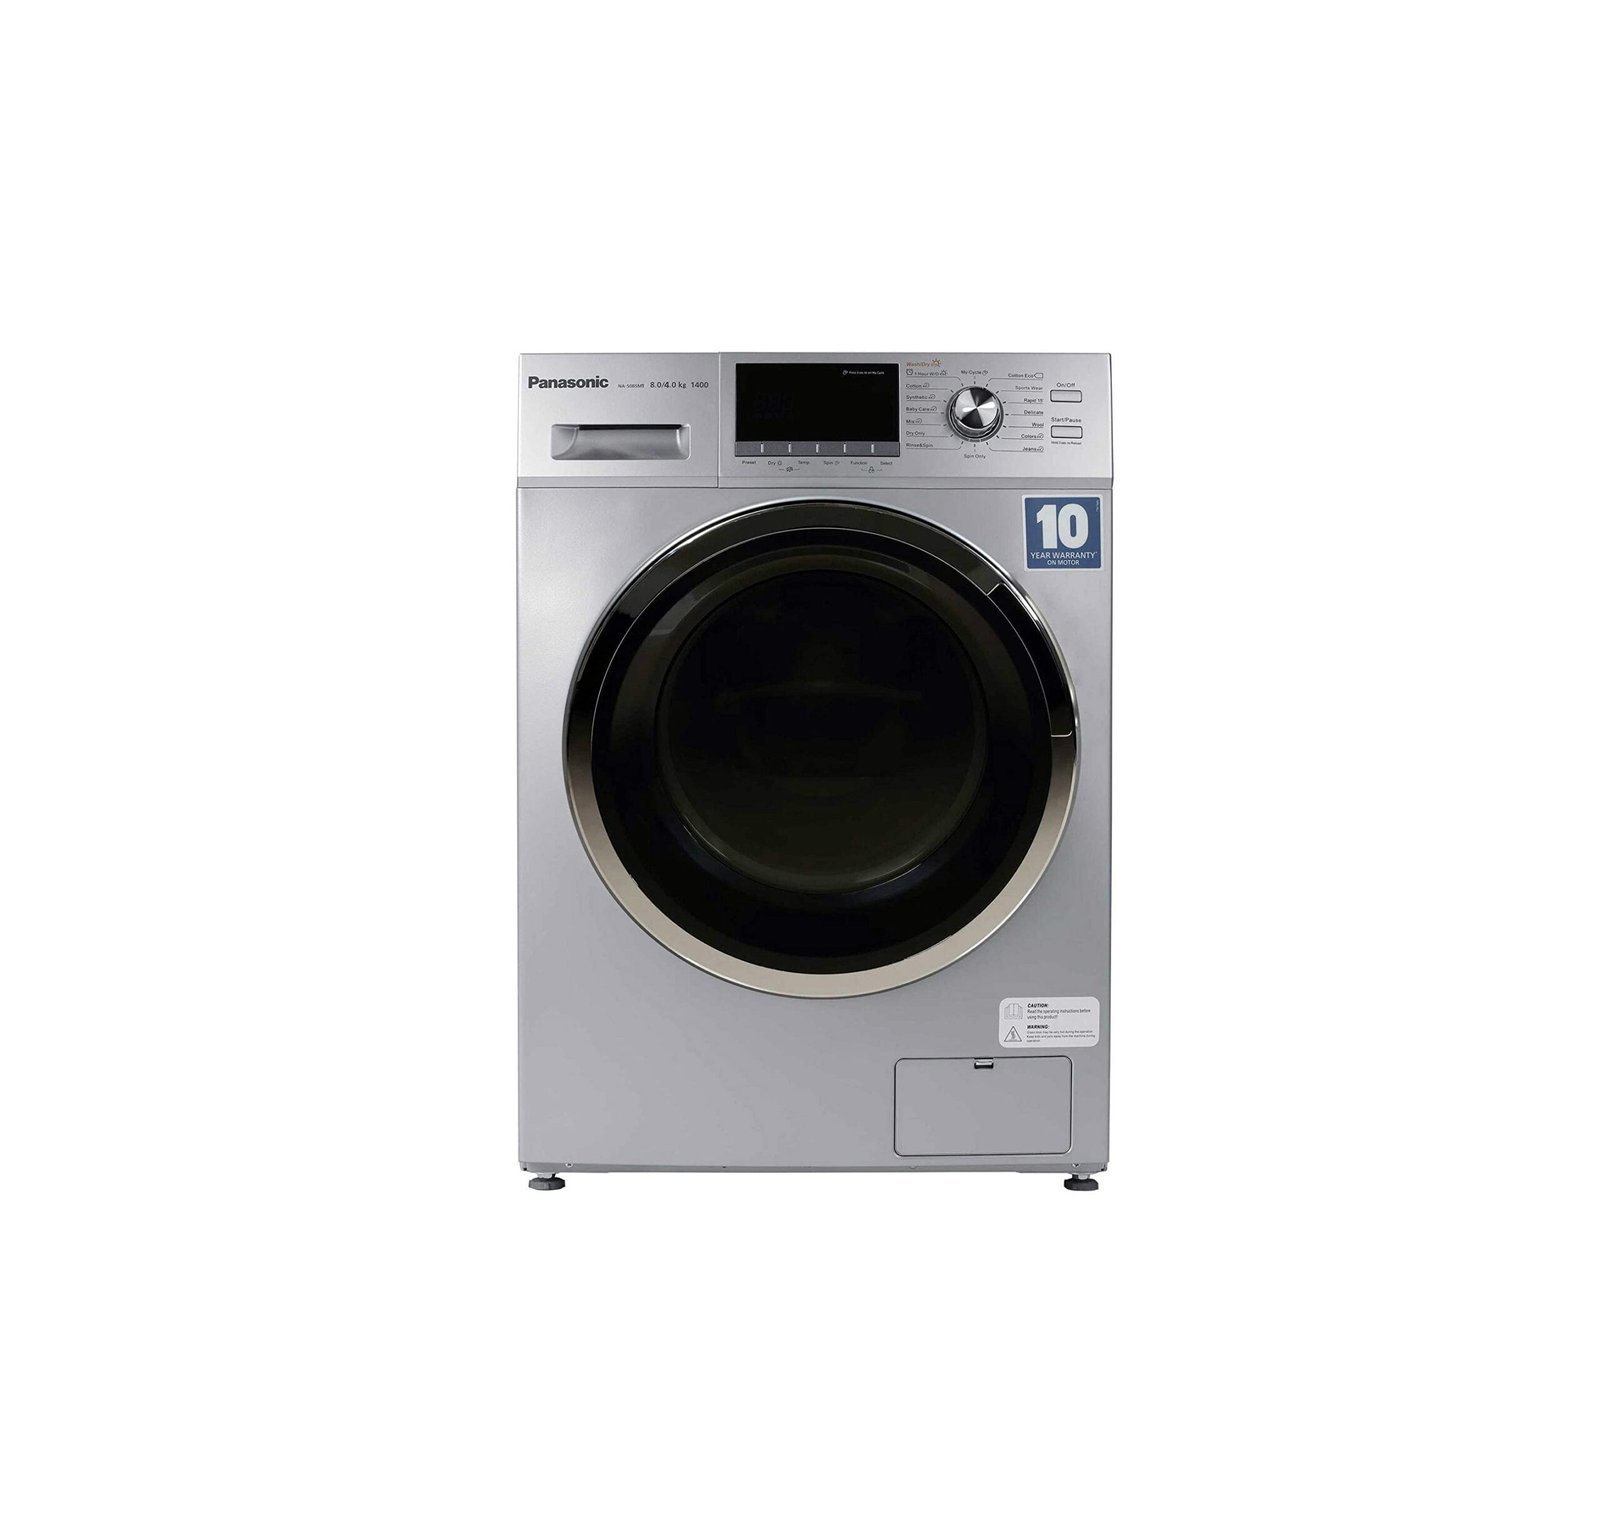 Panasonic 8 Kg Front Load Washing Machine Washer 6 Kg Dryer Color Silver Model-NAS086M3 | 1 Year Full 10 Years Motor Warranty.